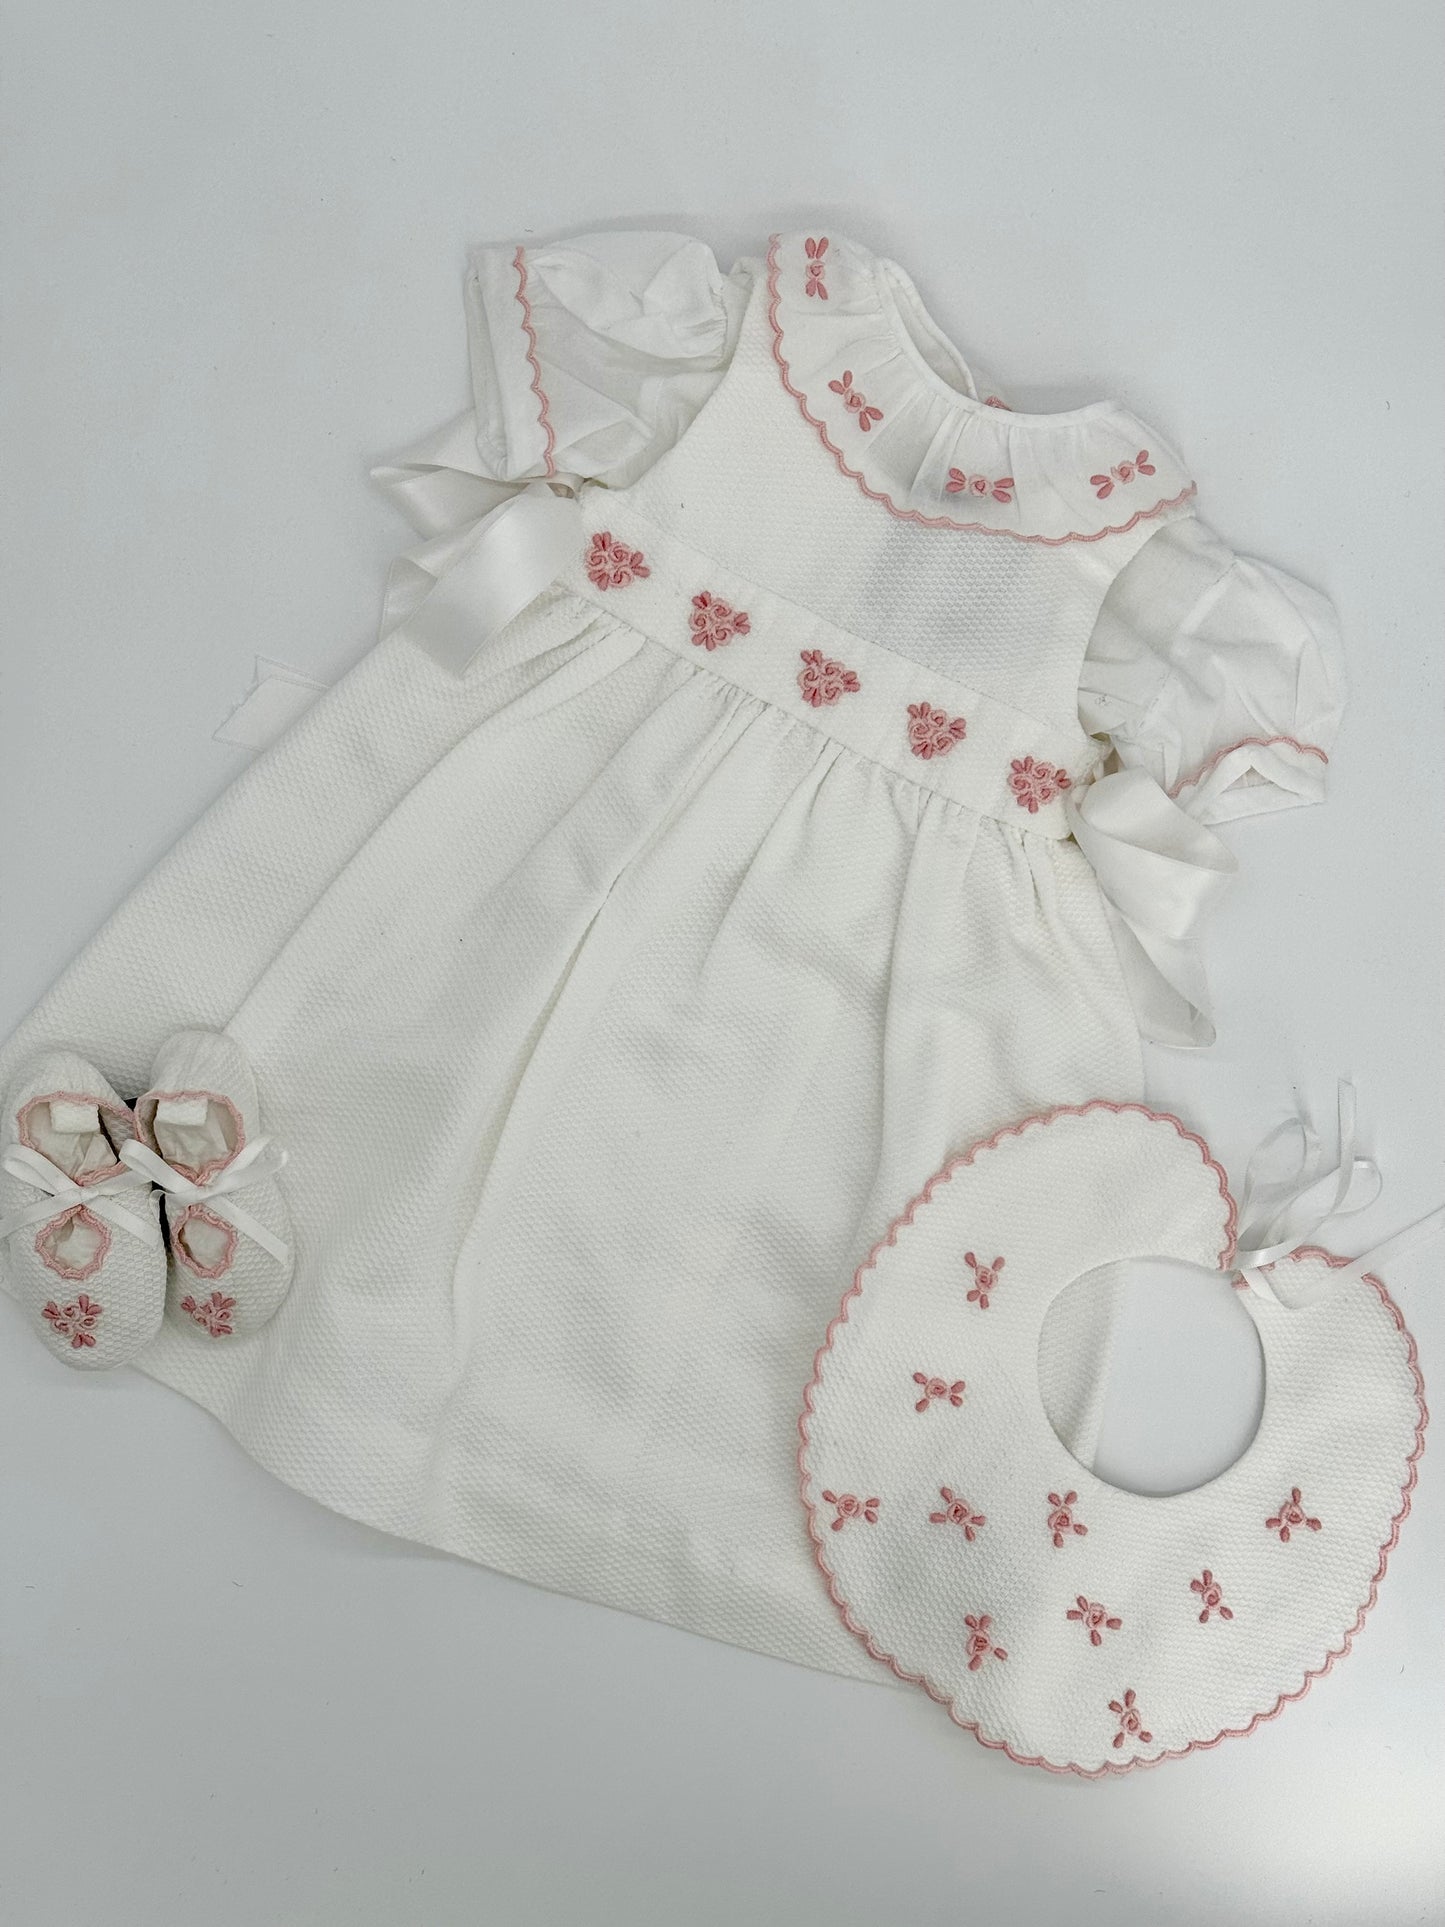 Hand Embroidered Heirloom Quality Baby Dress, Blouse, Bib and Booties